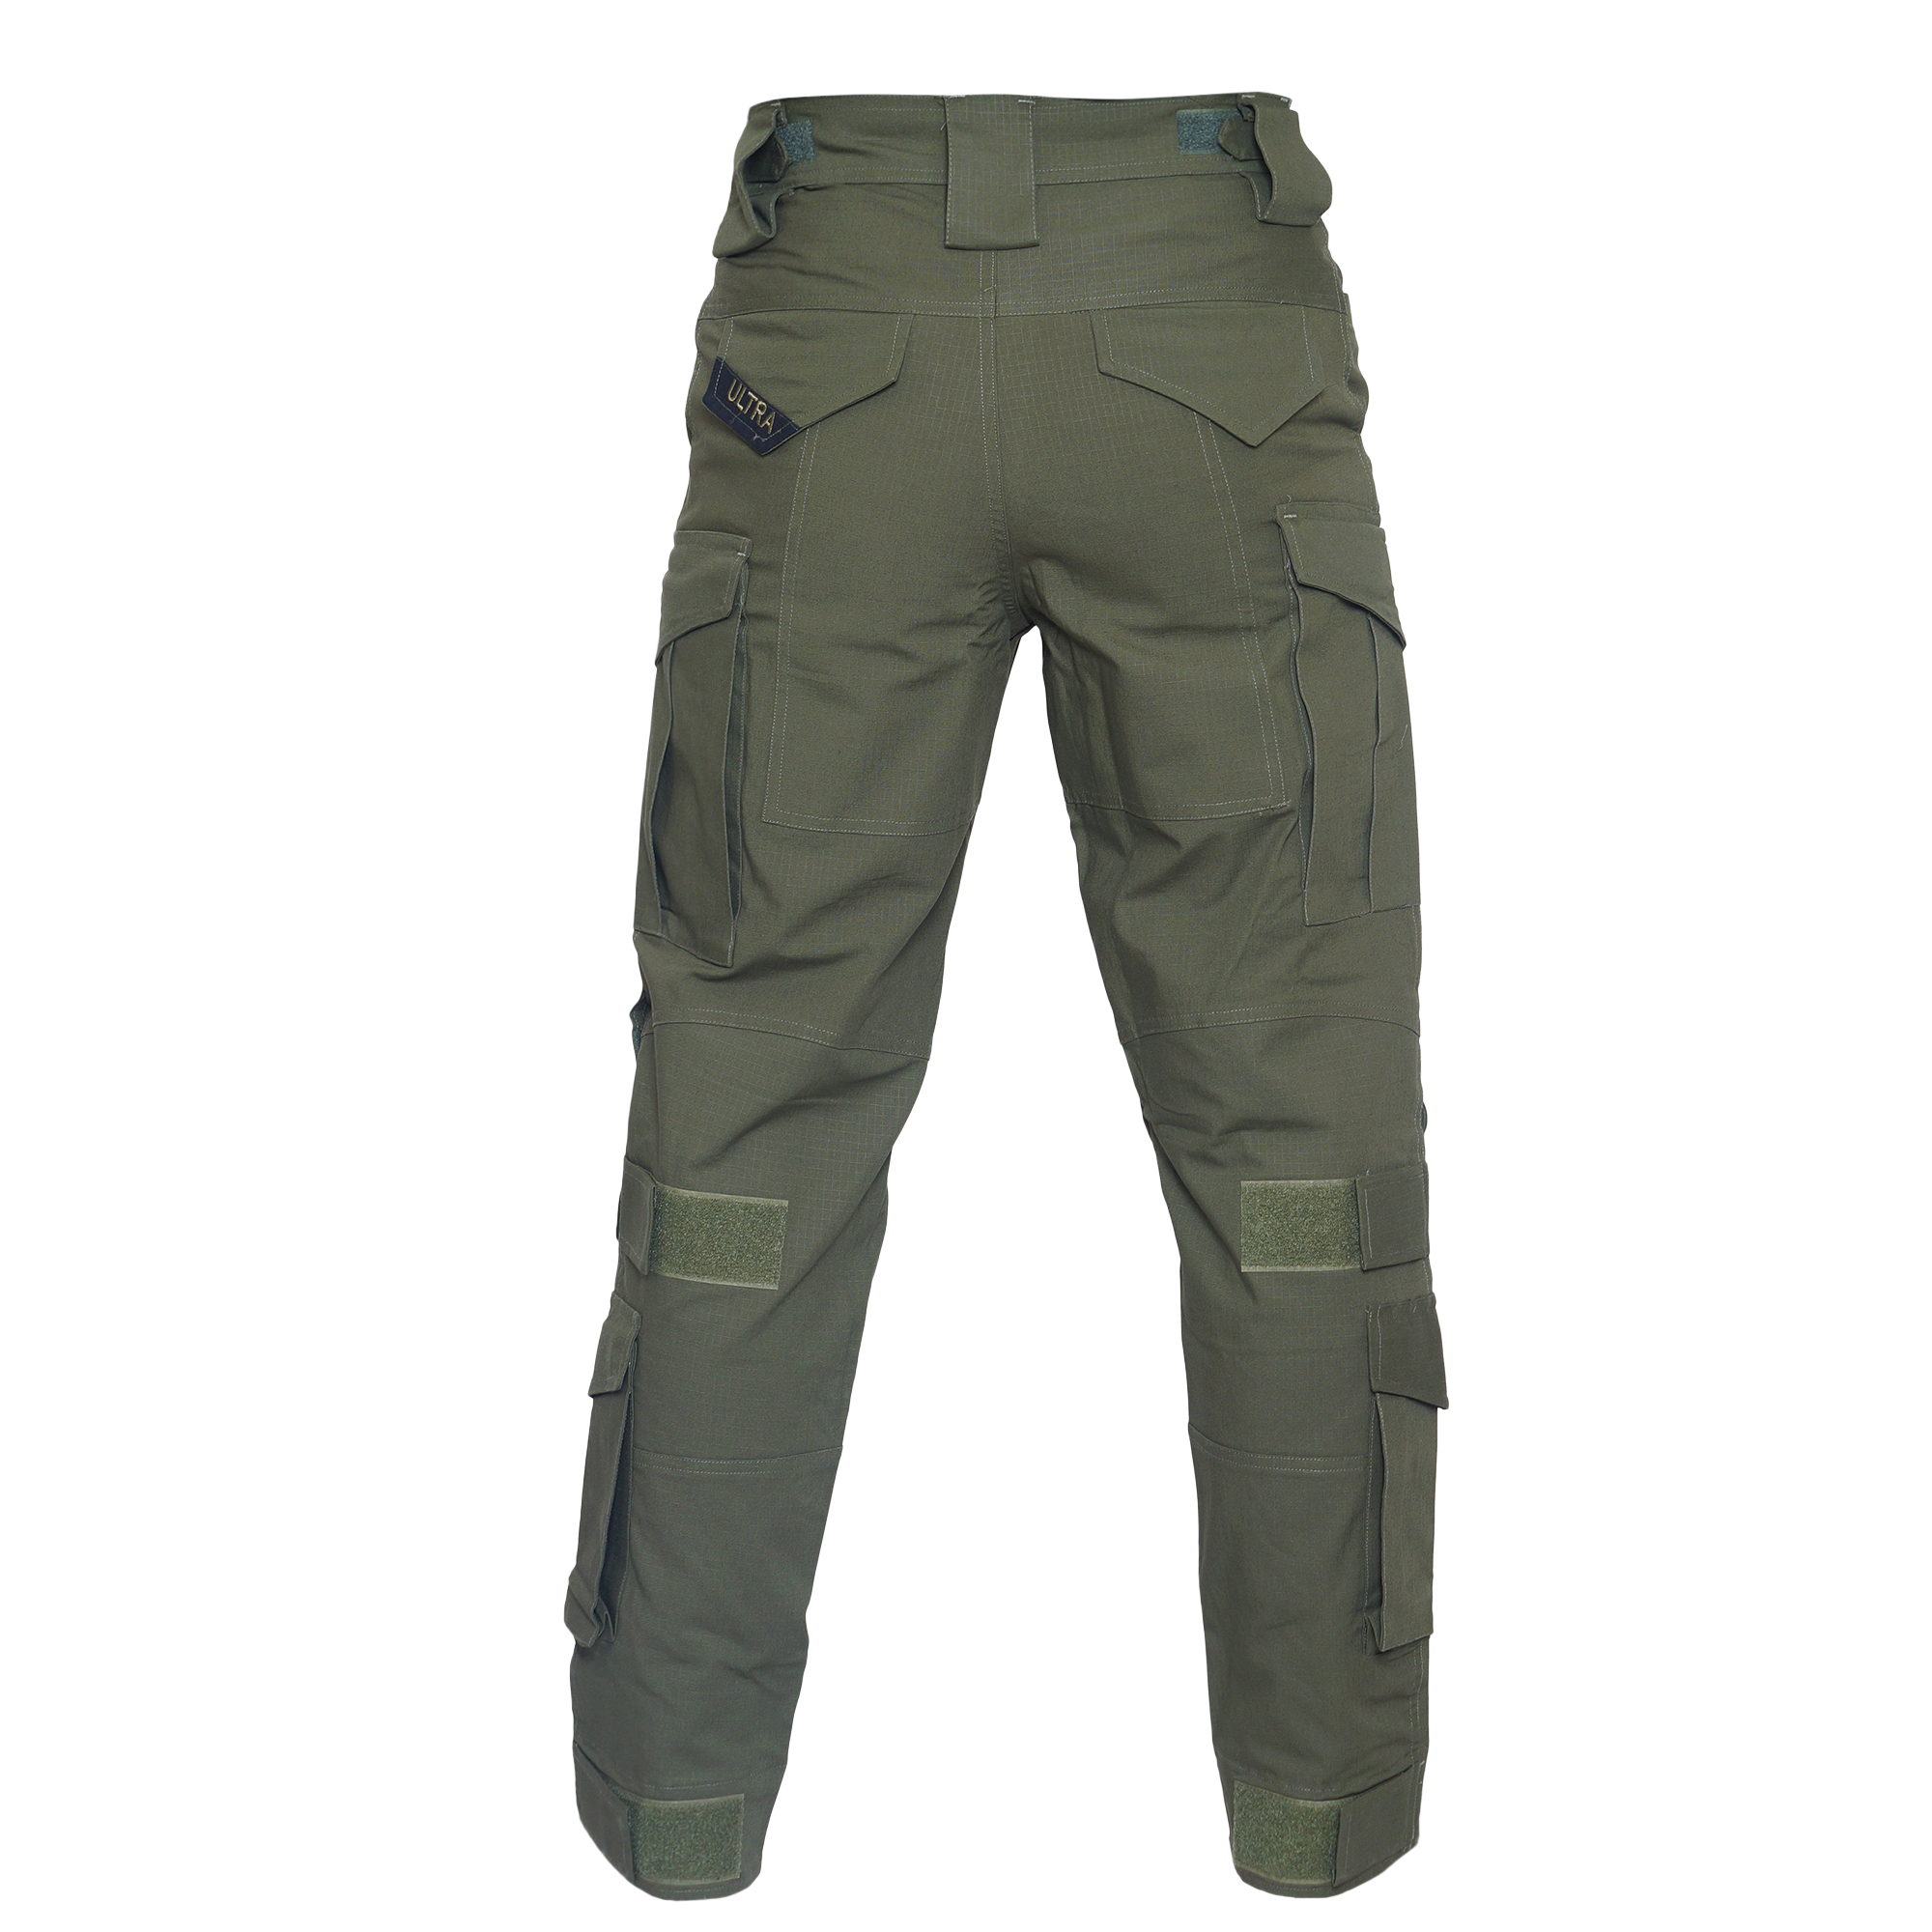 SPECIAL OPS Tactical Combat Pant ULTRA Model at Rs 2599/piece in Kanpur |  ID: 2853407974533